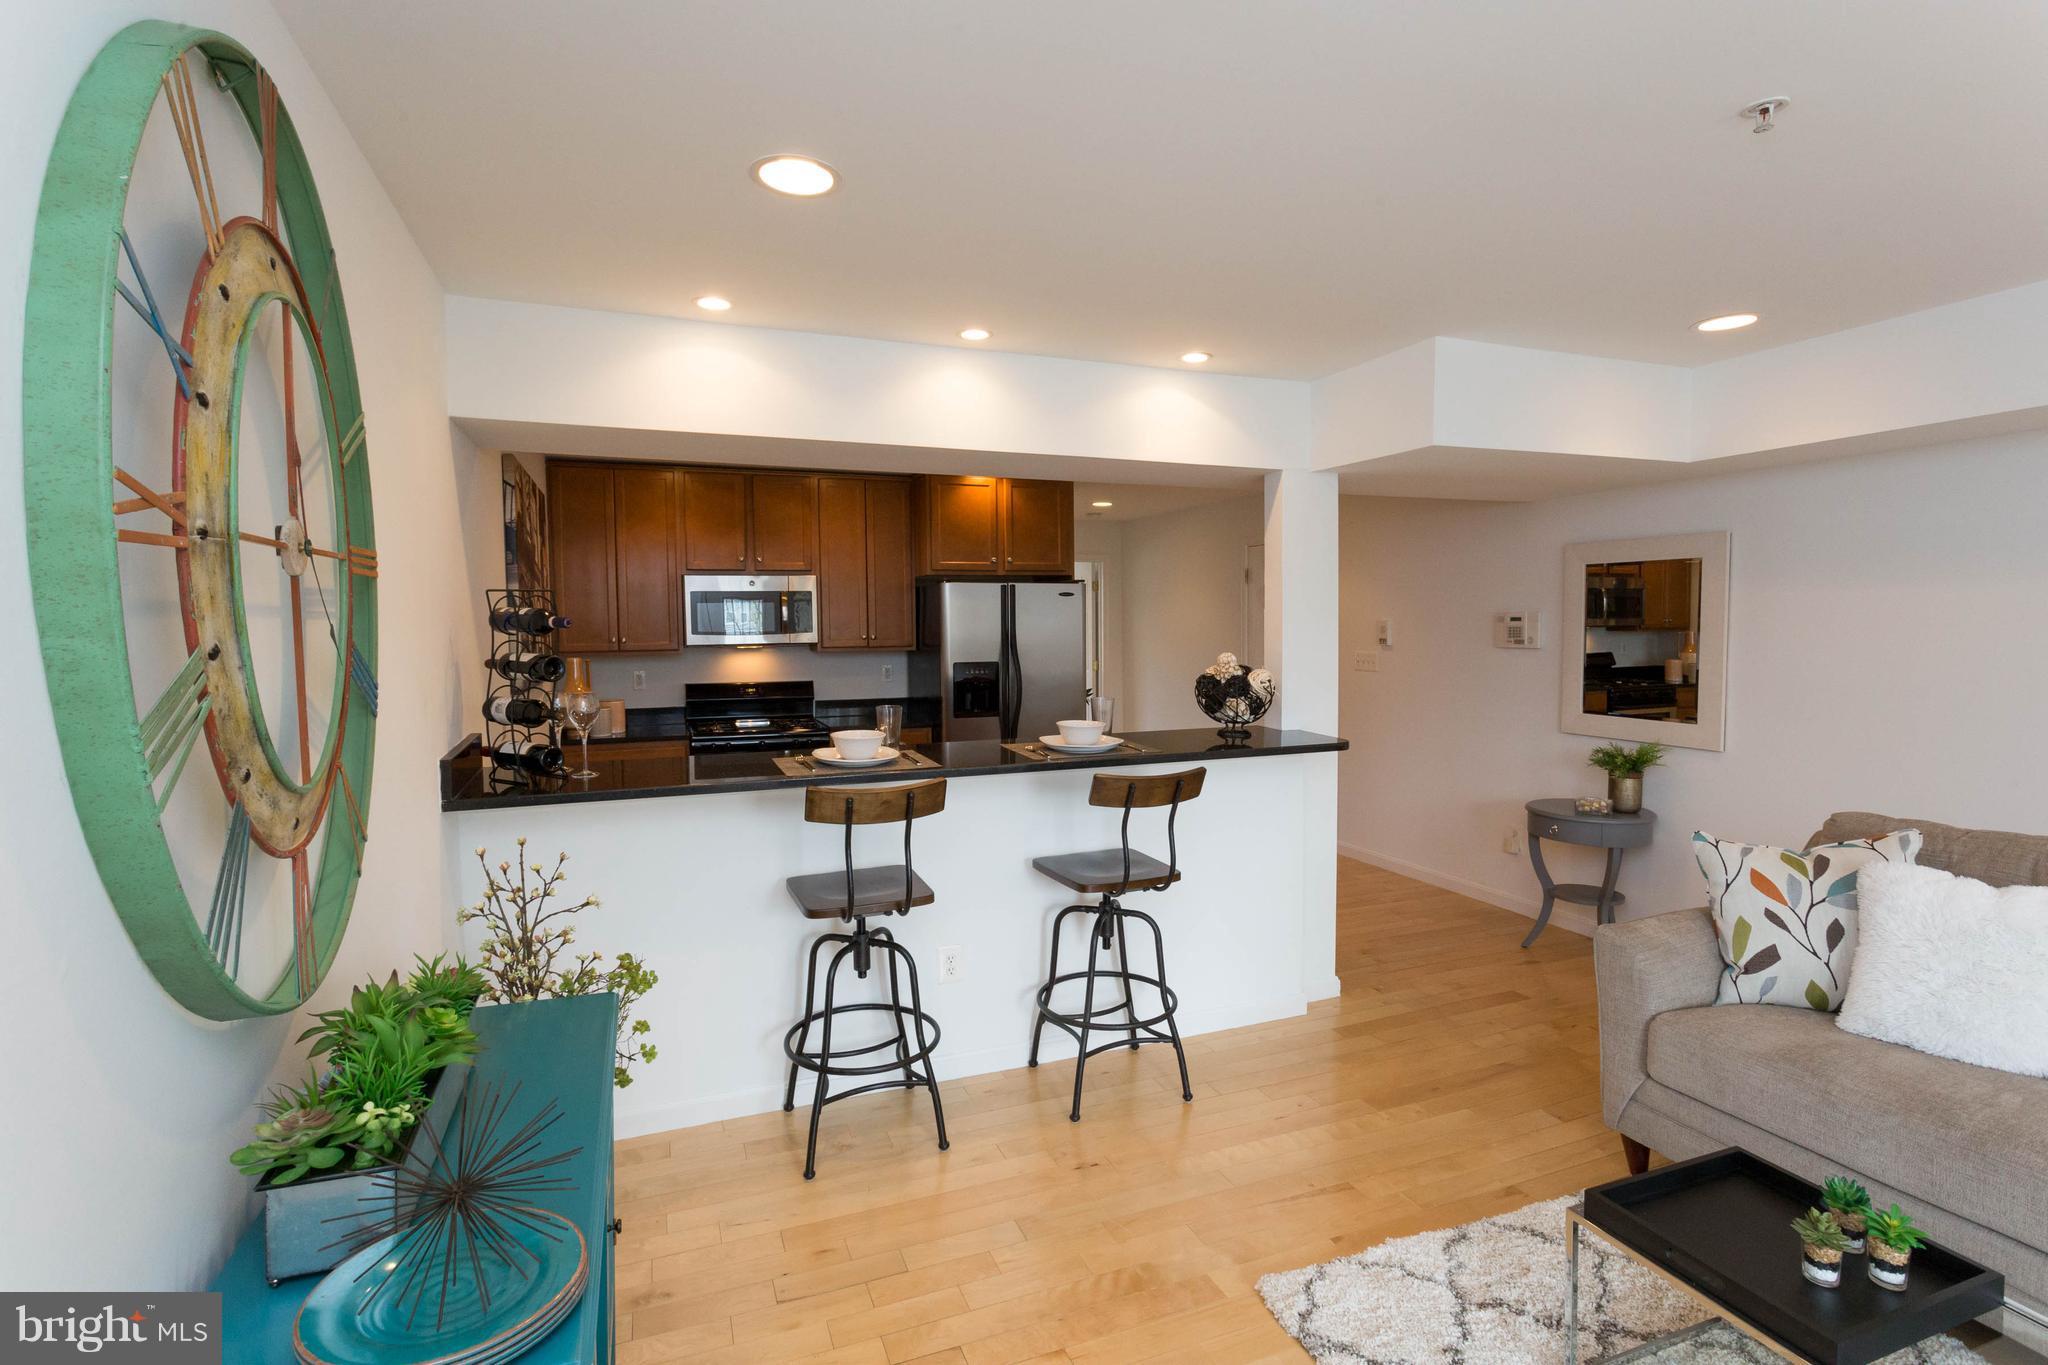 a view of kitchen with stainless steel appliances granite countertop dining table chairs and a refrigerator